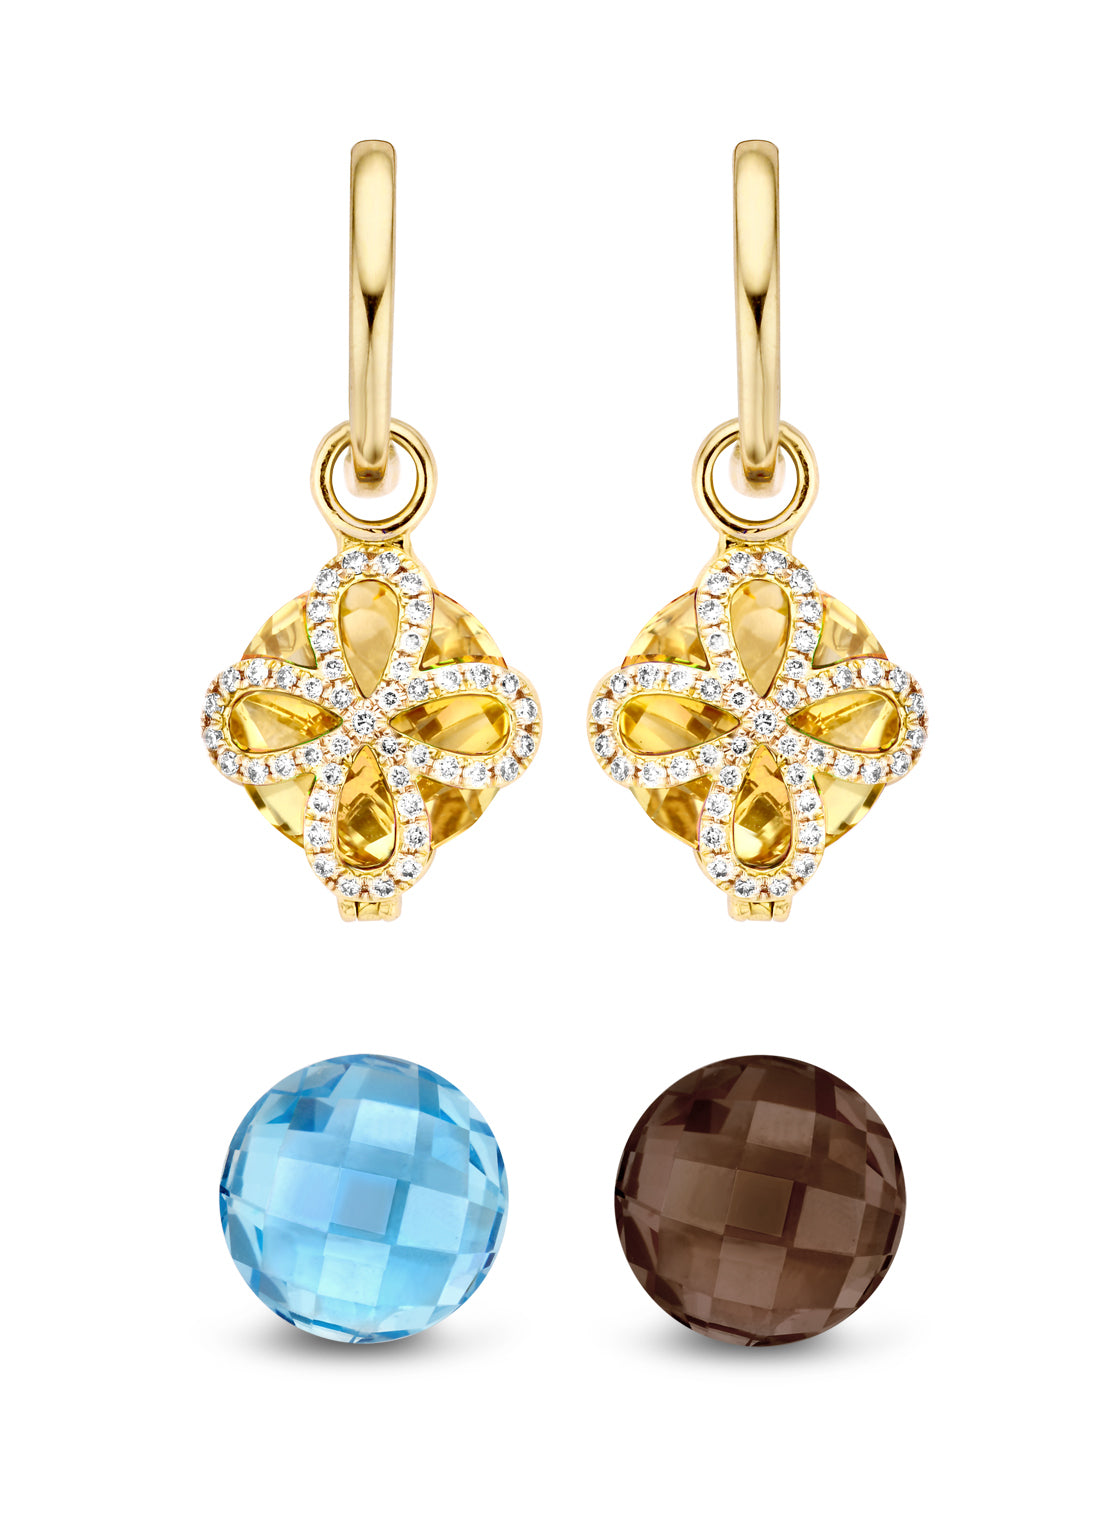 Yellow gold ear jewelry, 10.70 ct topaz, variety